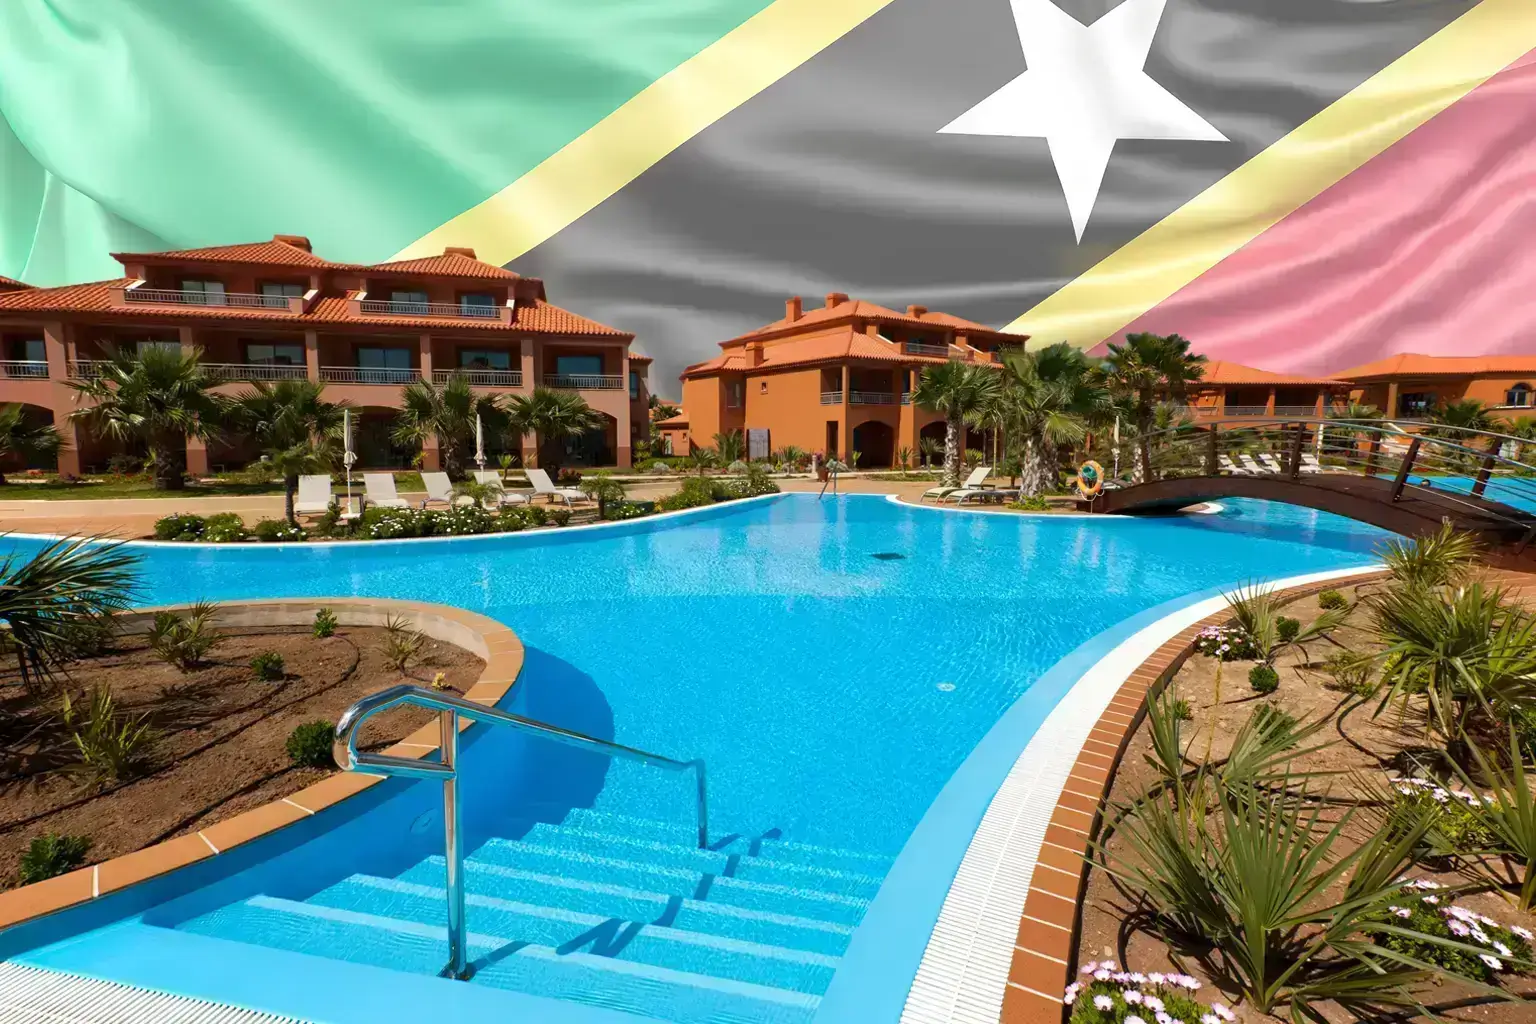 Get St. Kitts and Nevis citizenship through real estate investment